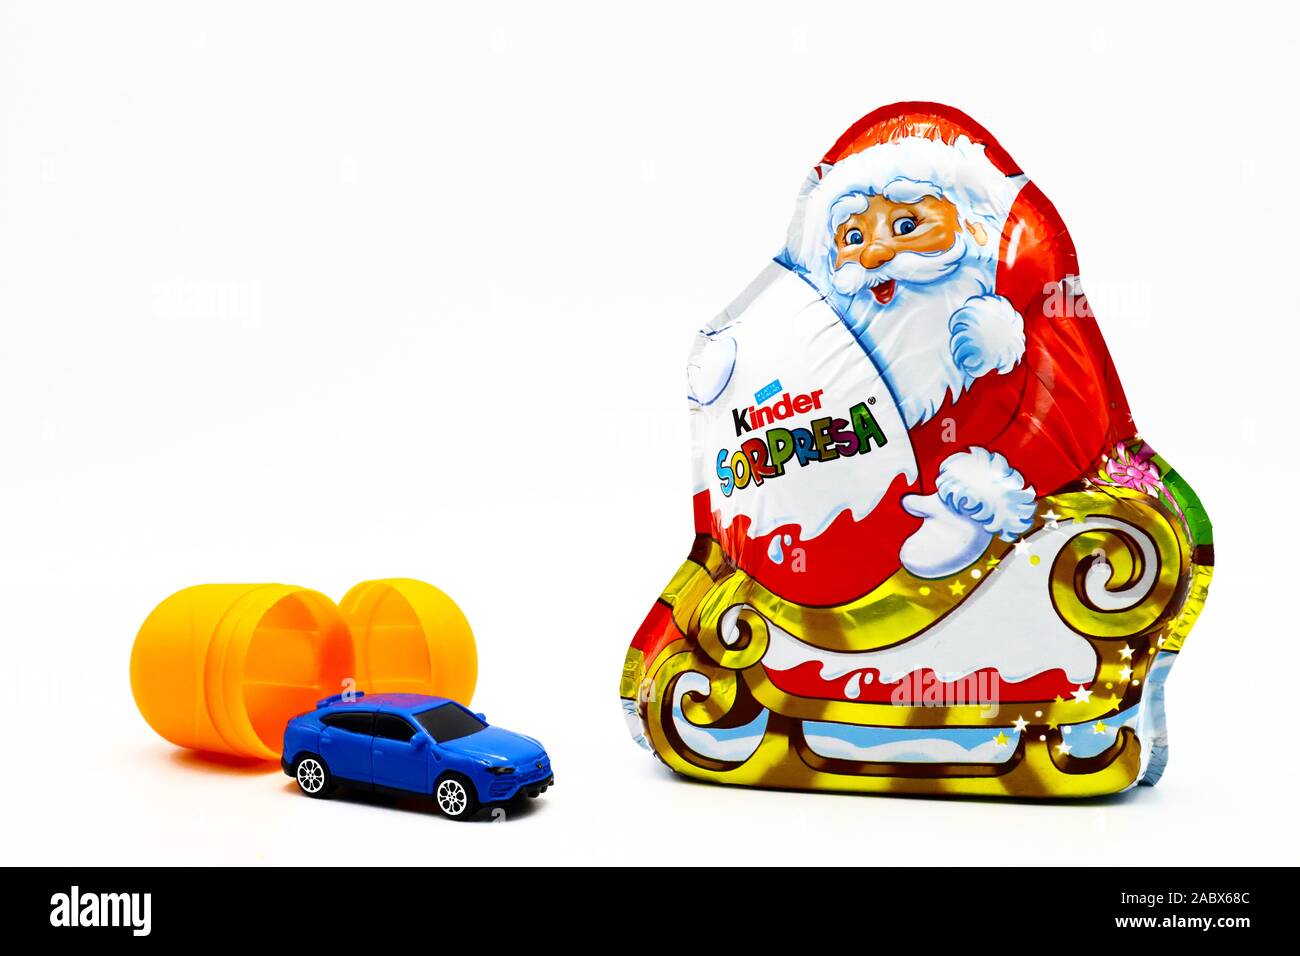 Babbo Natale Kinder.Santa Claus Egg High Resolution Stock Photography And Images Alamy